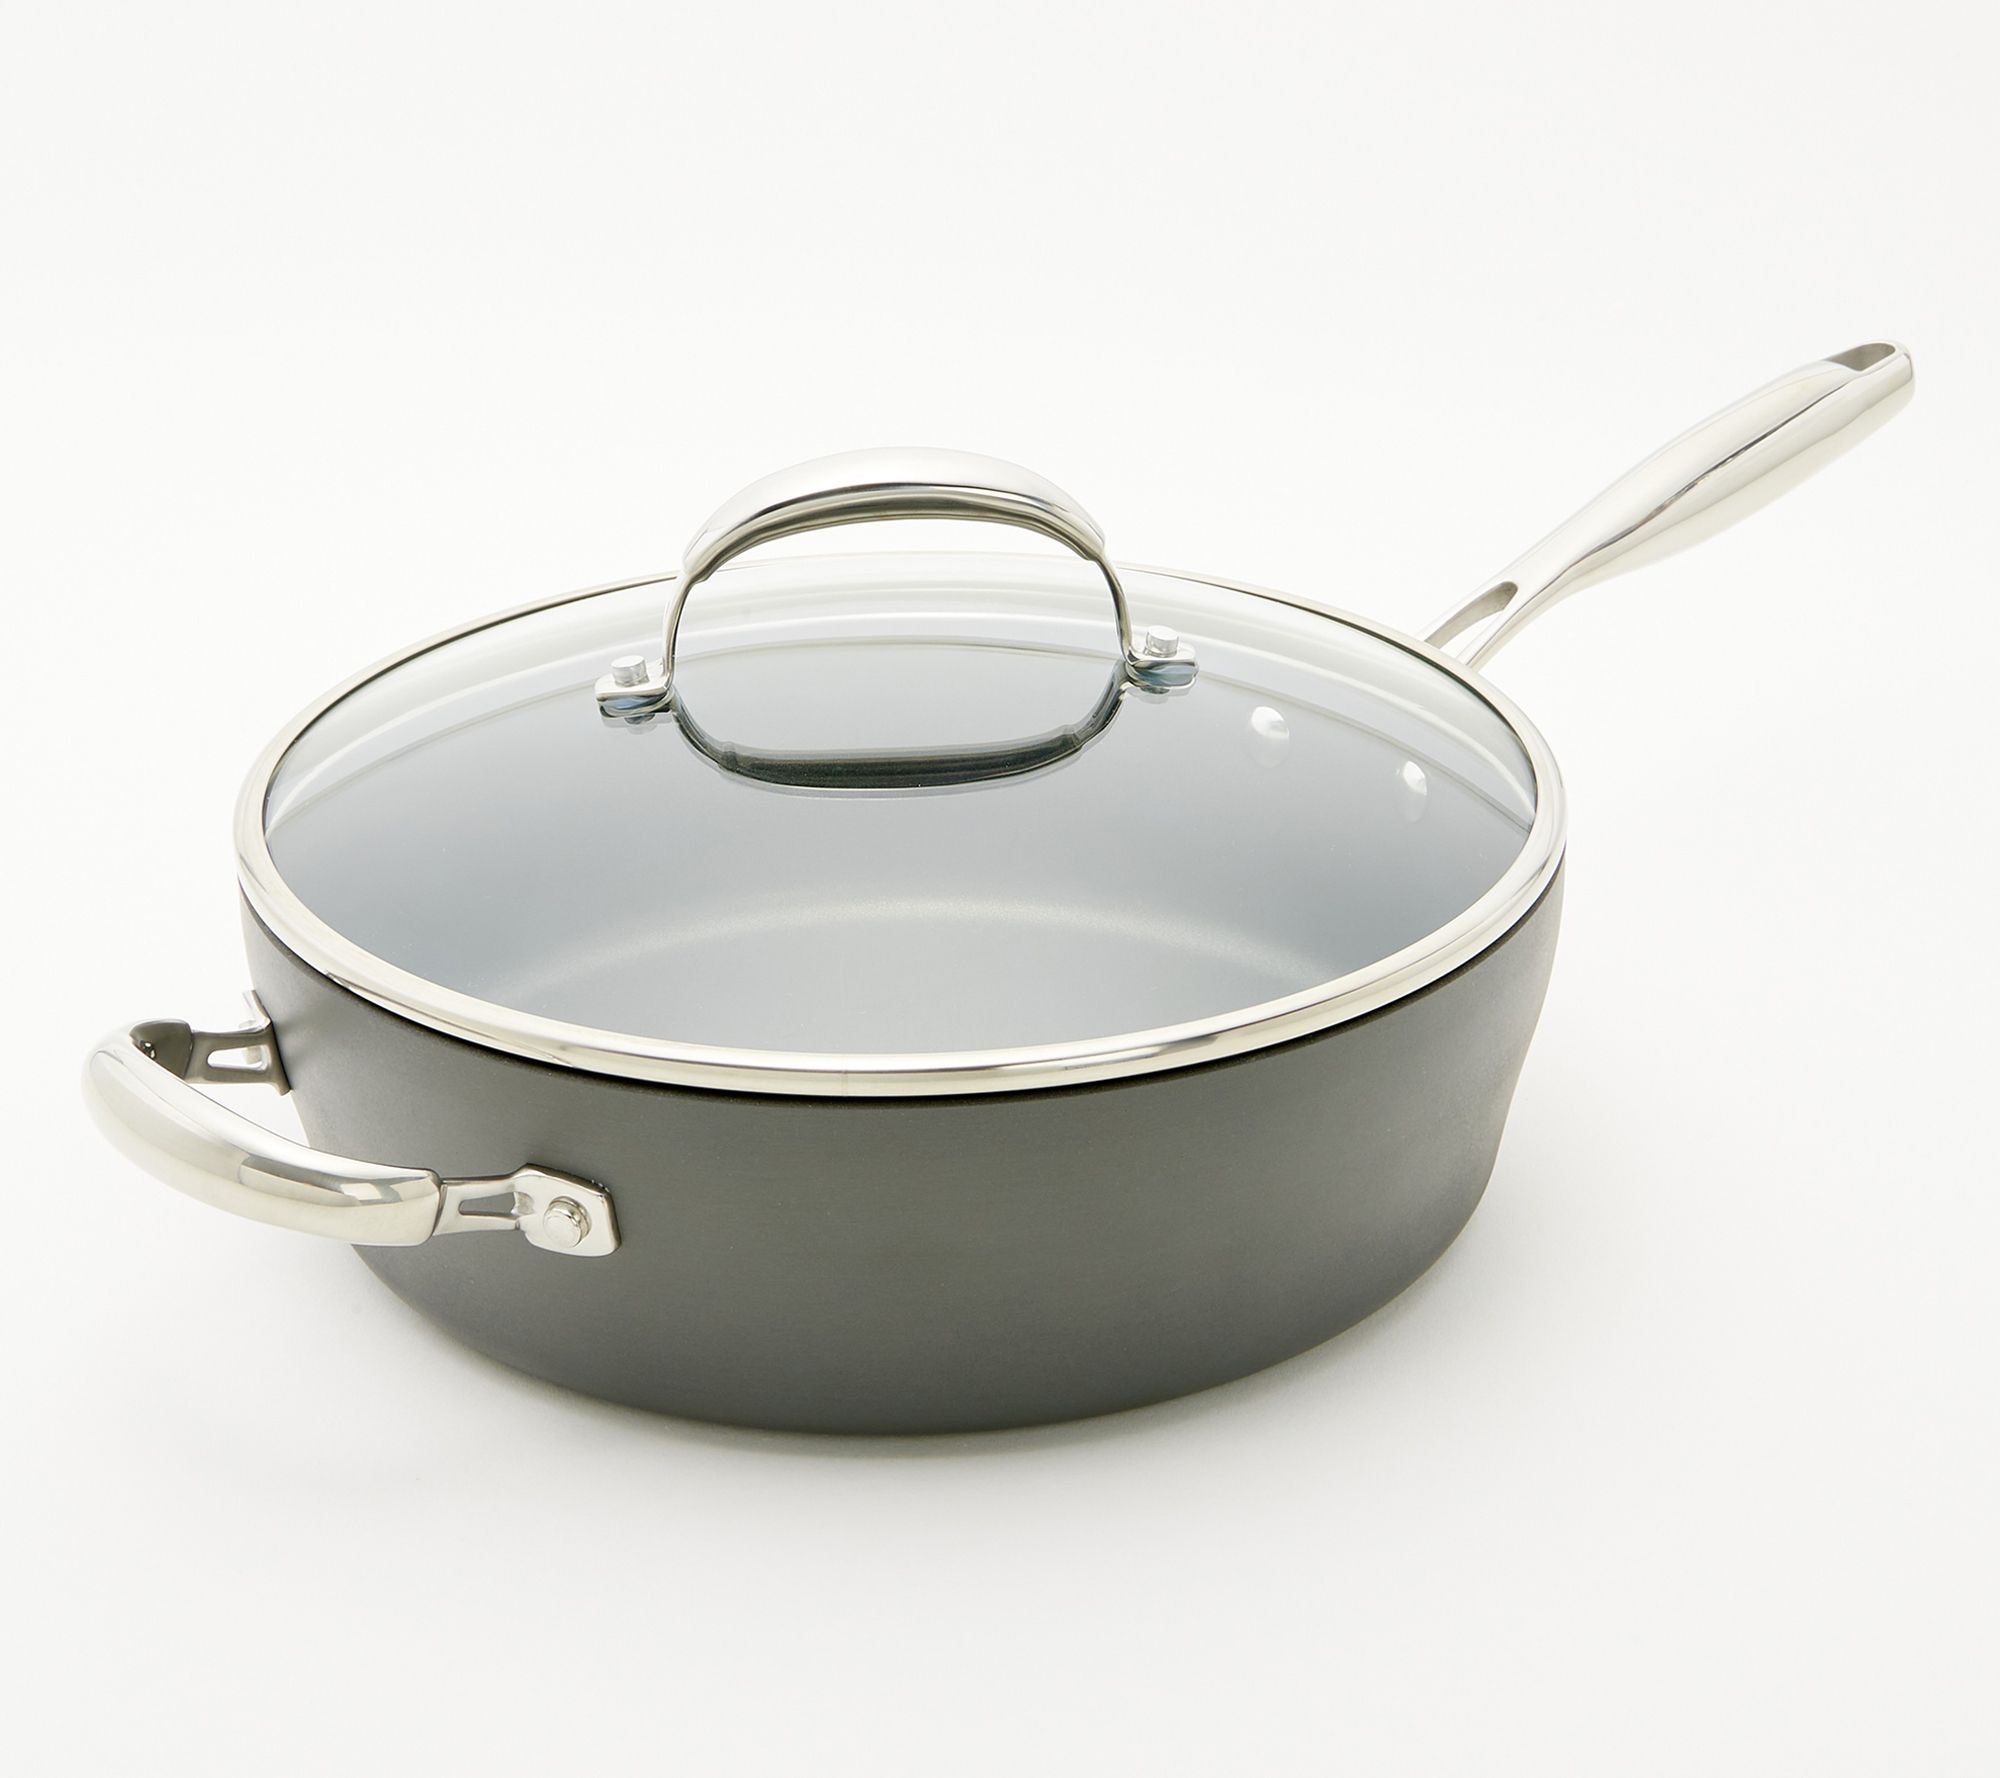  All-Clad Essentials Hard Anodized Nonstick Sauce Pan